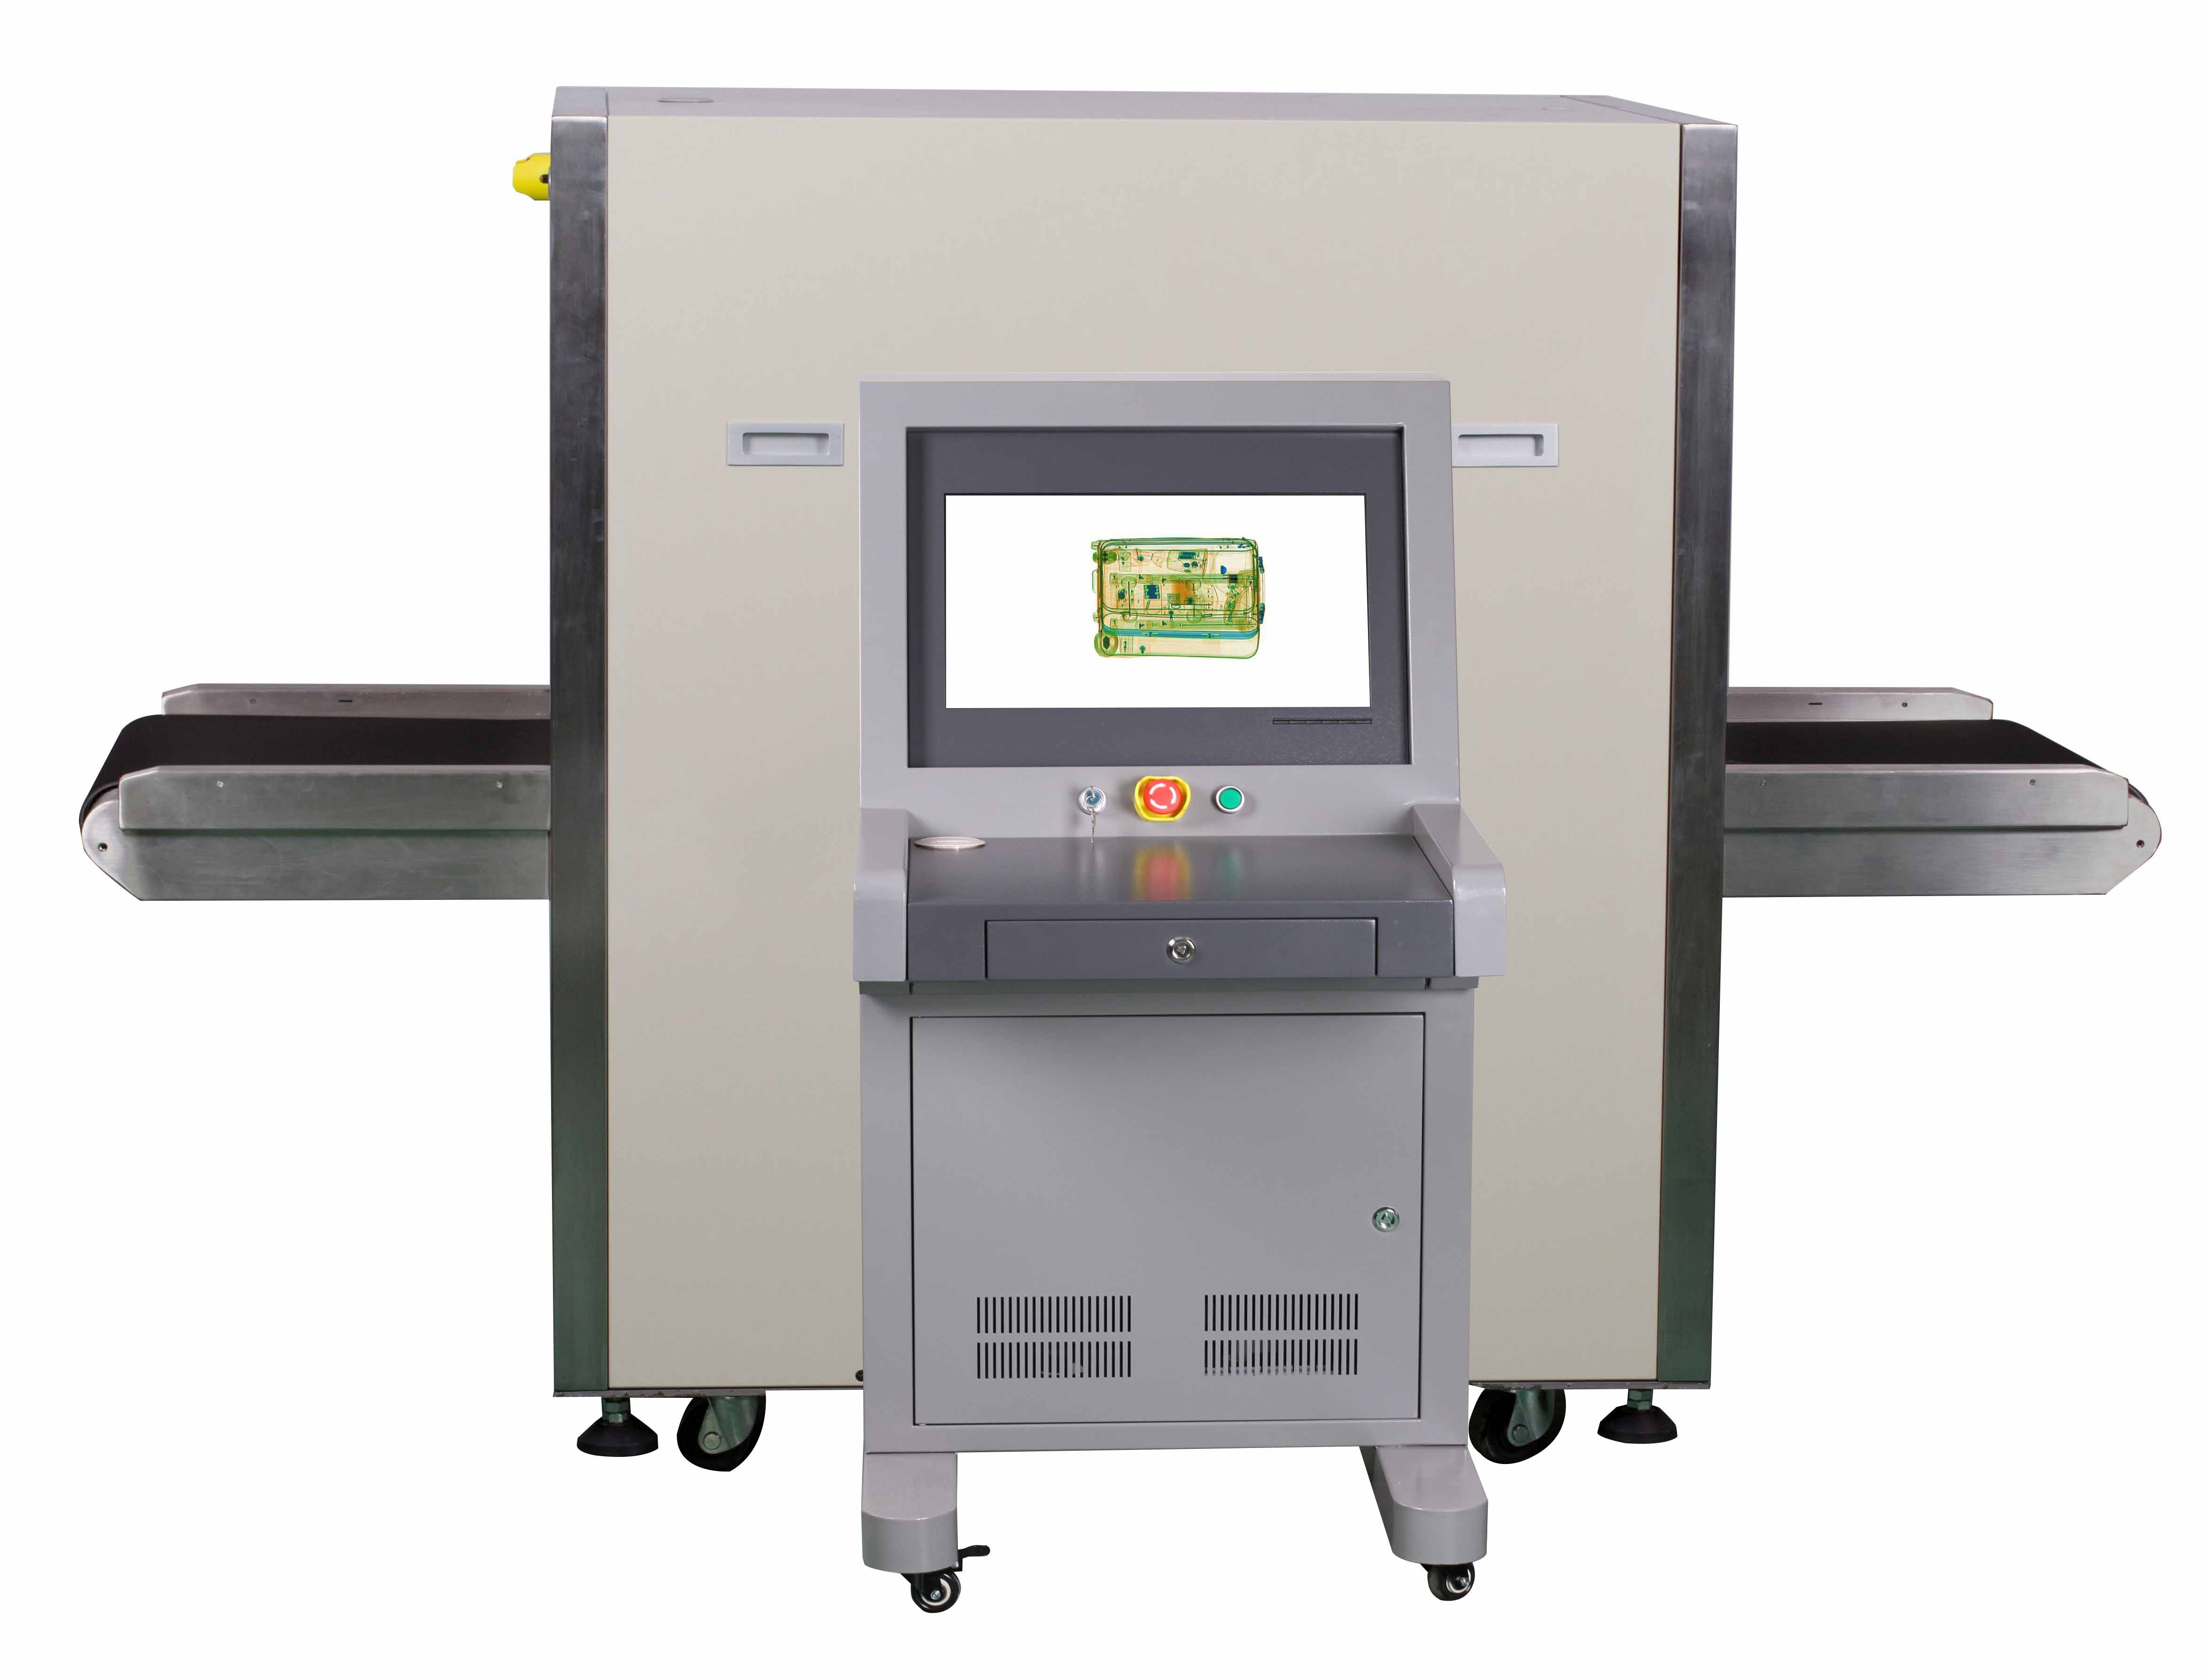  security checkpoint x ray baggage screening scan scanner